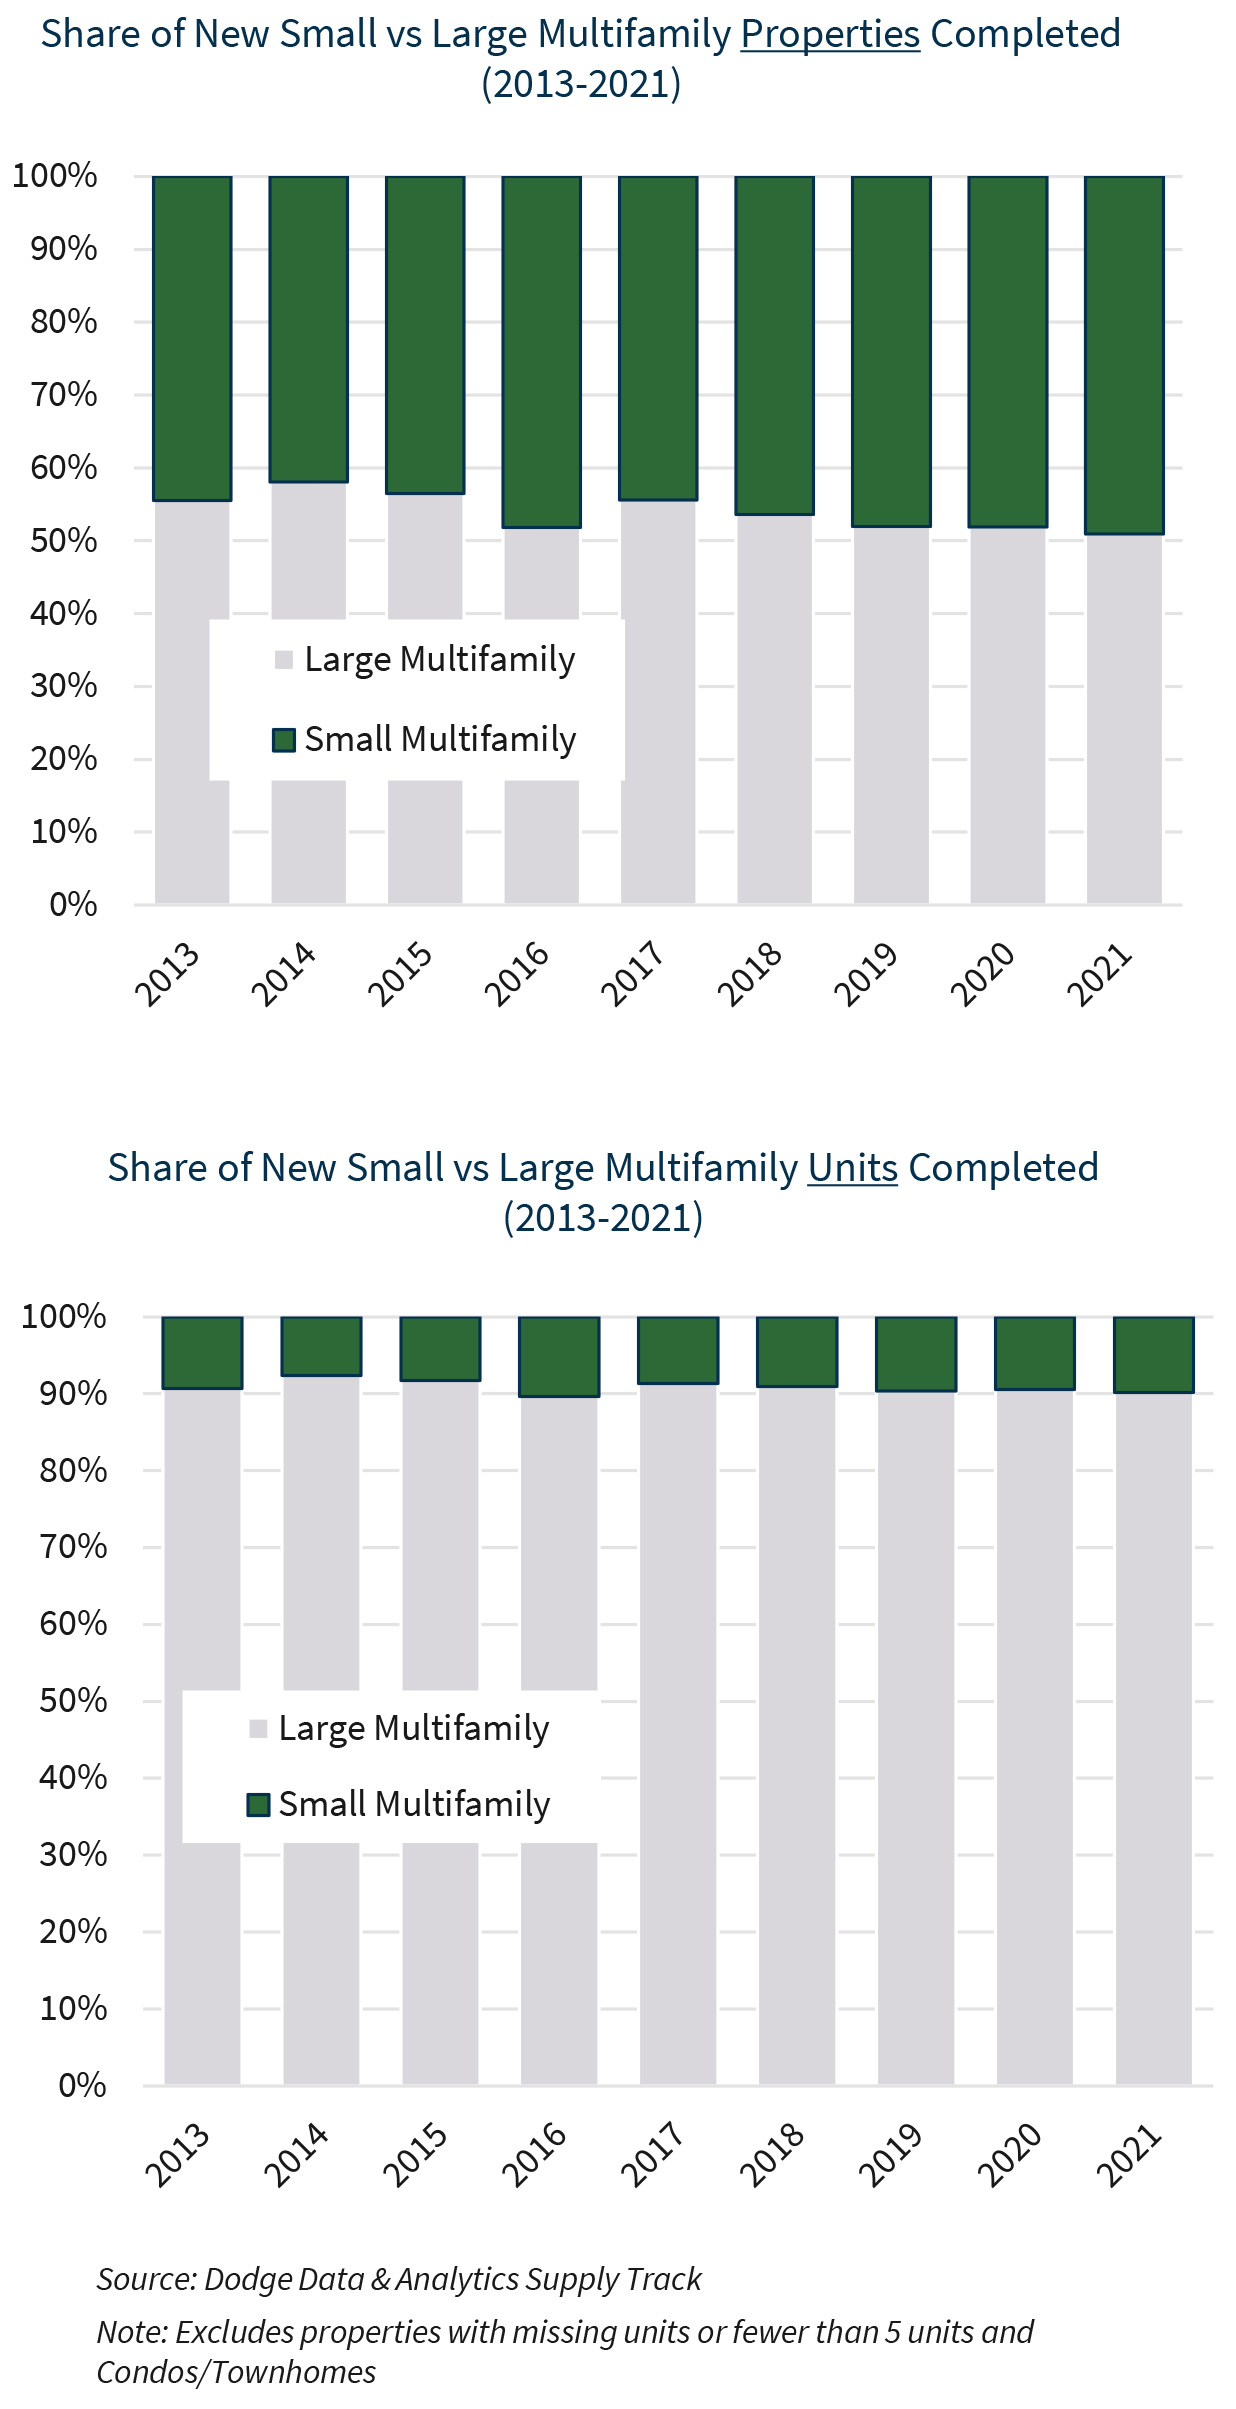 Share of New Small vs Large Multifamily Properties Completed  (2013-2021) | Share of New Small vs Large Multifamily Units Completed  (2013-2021)